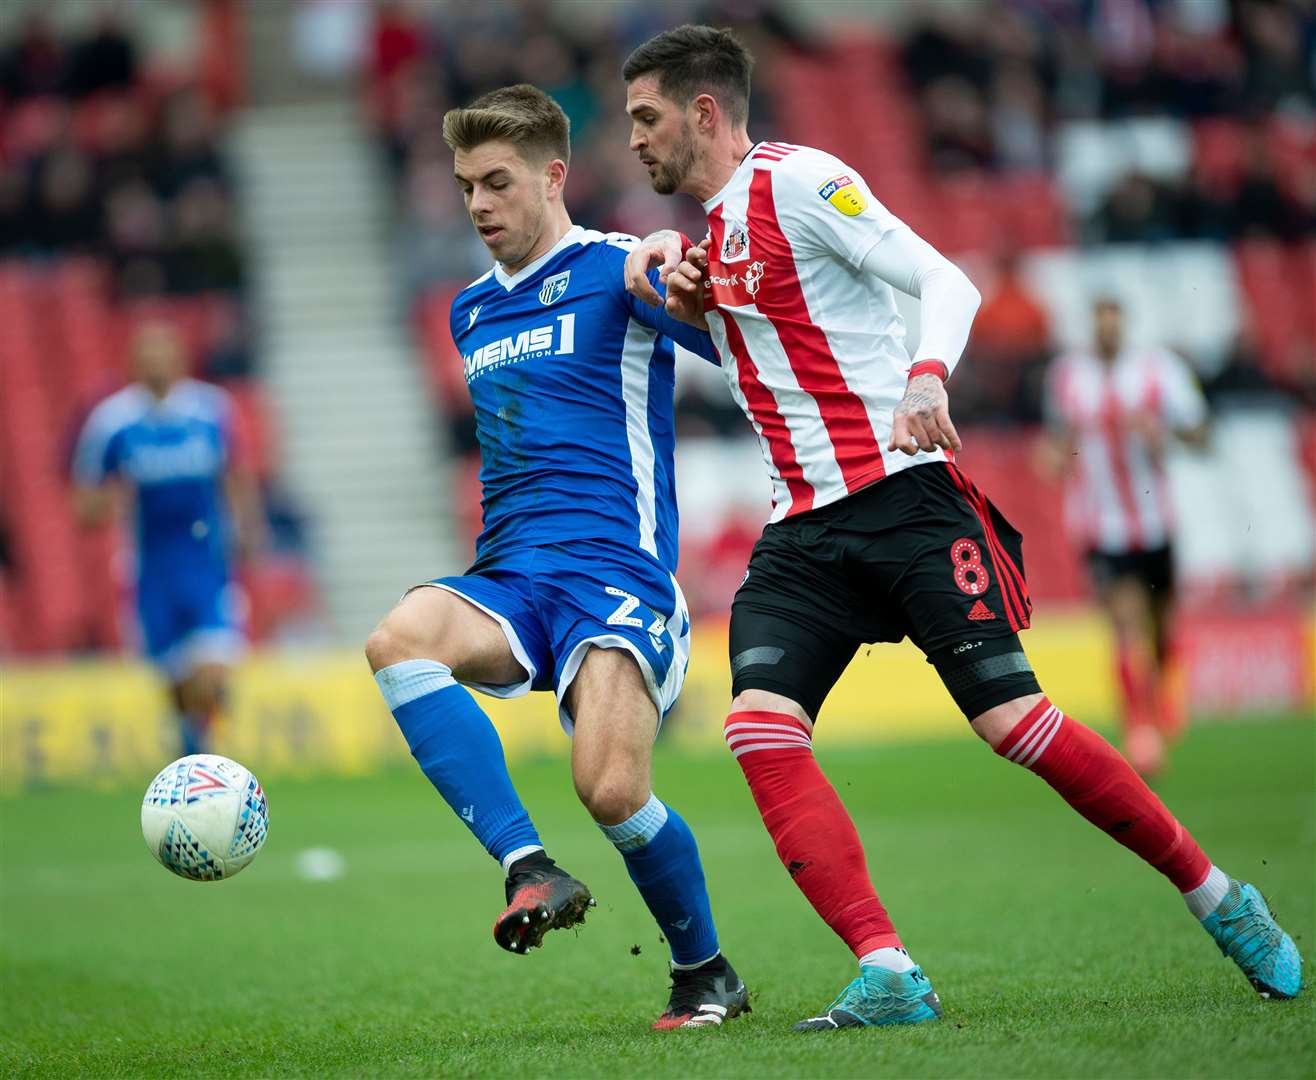 Gillingham's last game in League 1 was against Sunderland, a club with a vastly higher budget than their own Picture: Ady Kerry